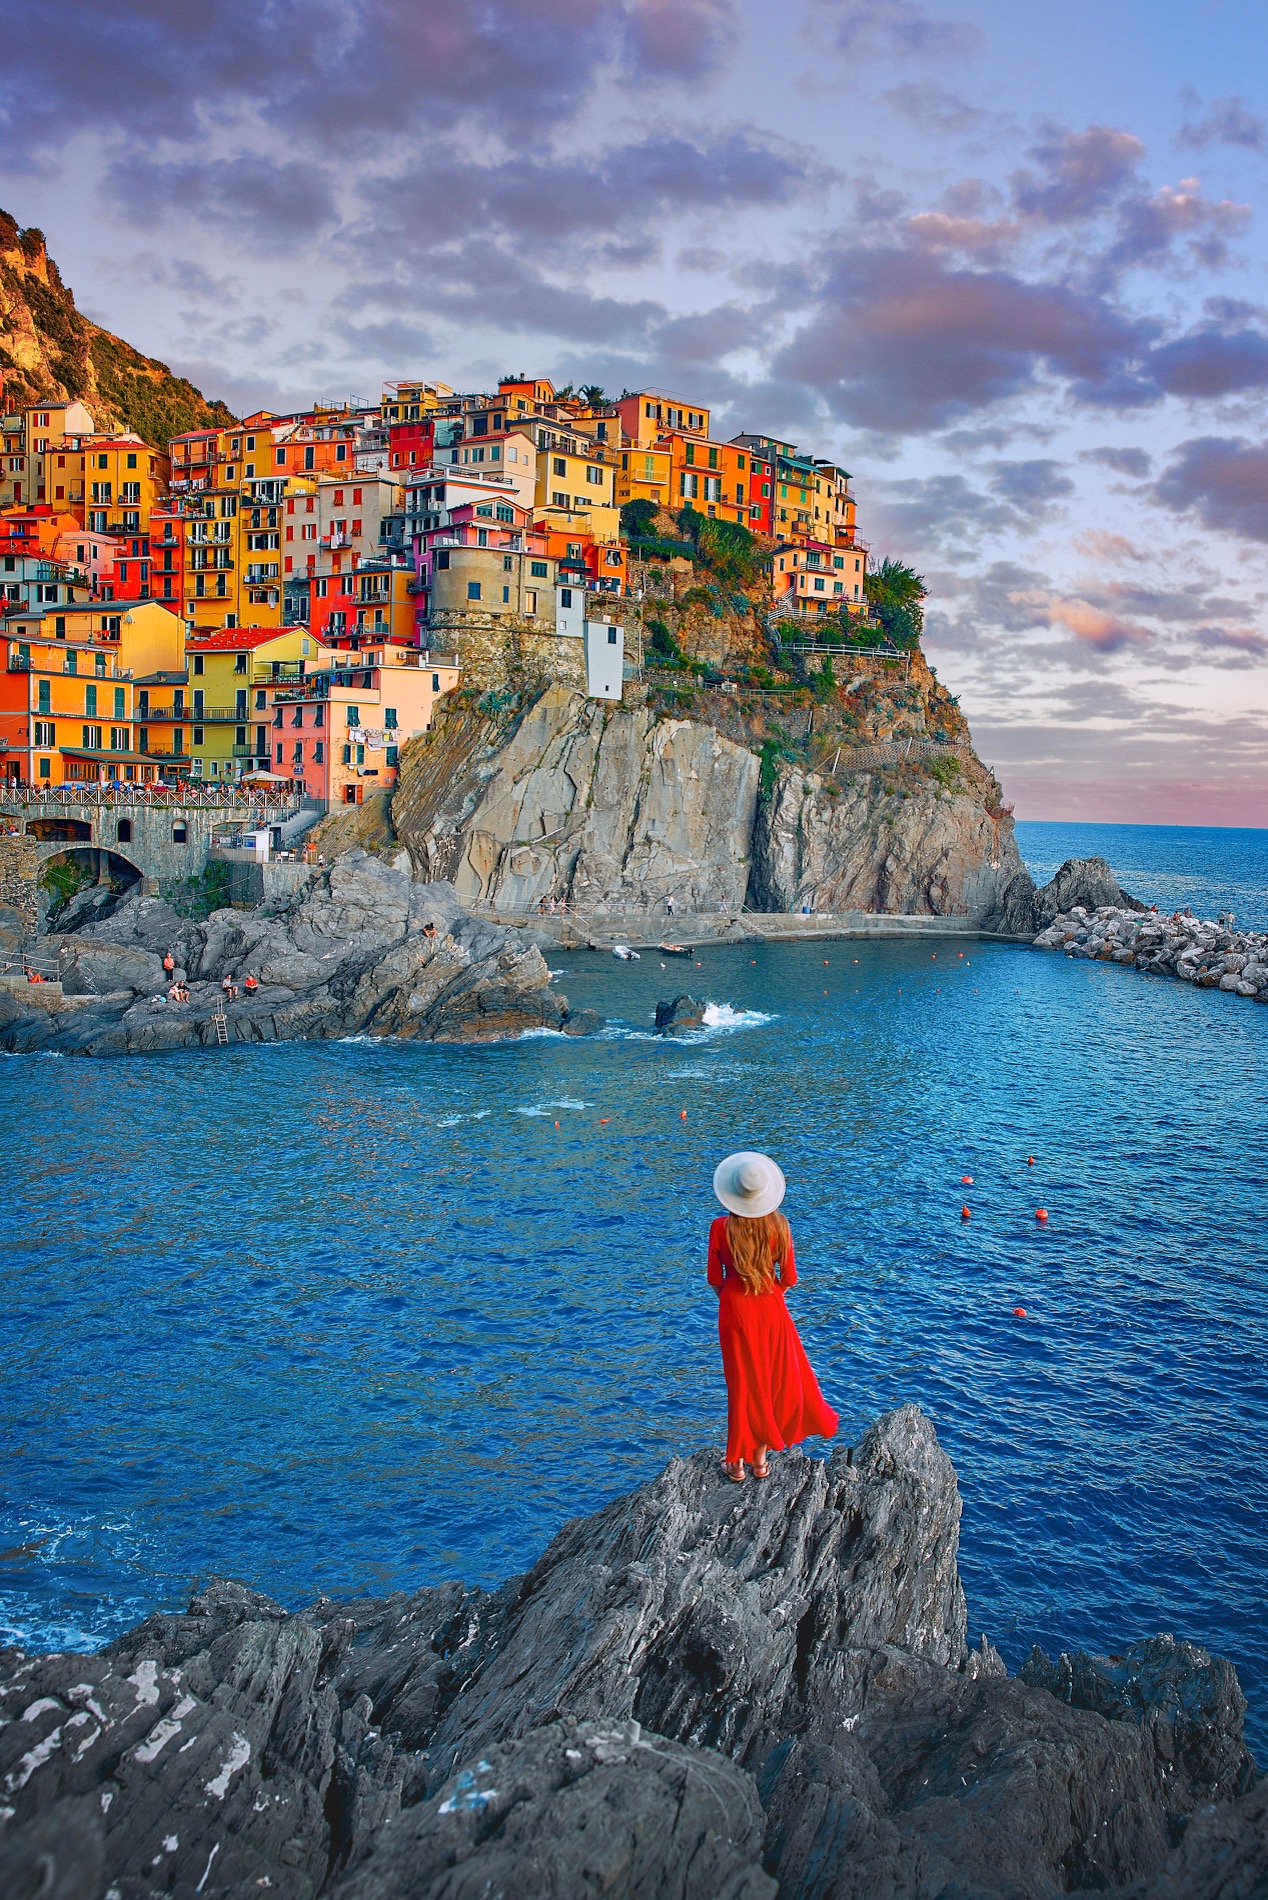 A woman in a red dress and hat stands on a rock looking over the ocean at one of the towns of Cinque Terre in Italy.